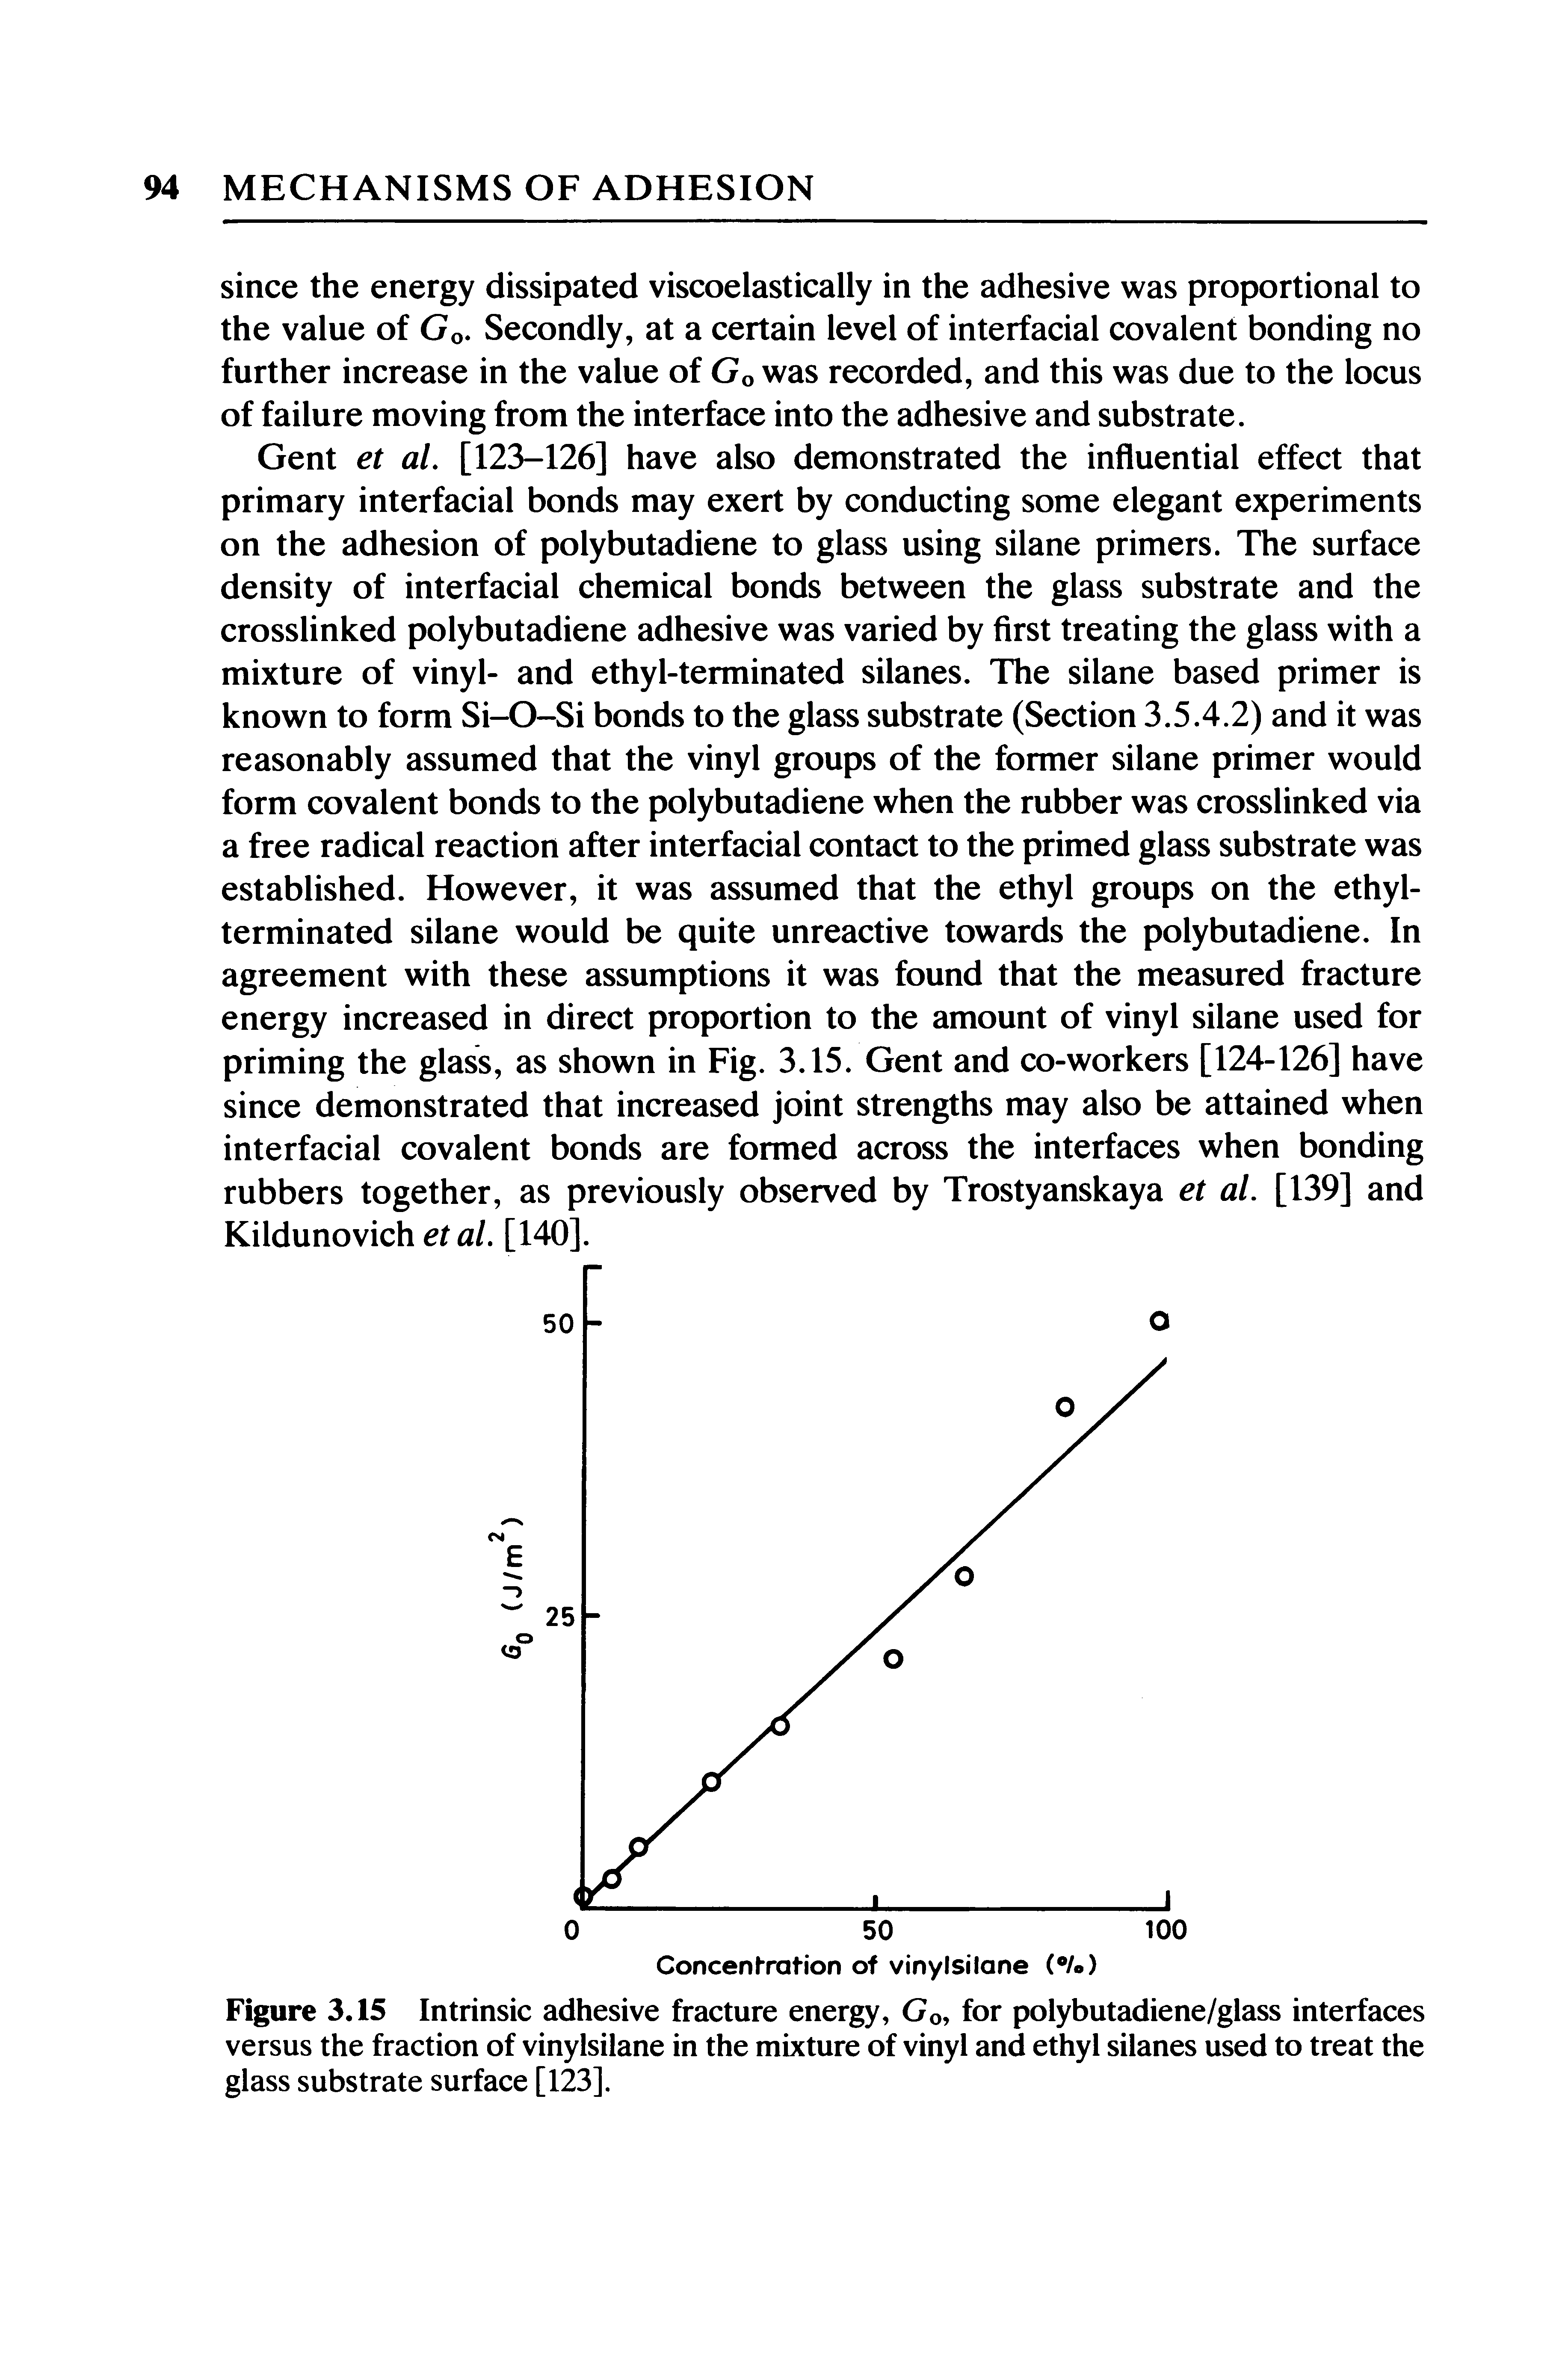 Figure 3.15 Intrinsic adhesive fracture energy, Go, for polybutadiene/glass interfaces versus the fraction of vinylsilane in the mixture of vinyl and ethyl silanes used to treat the glass substrate surface [123].